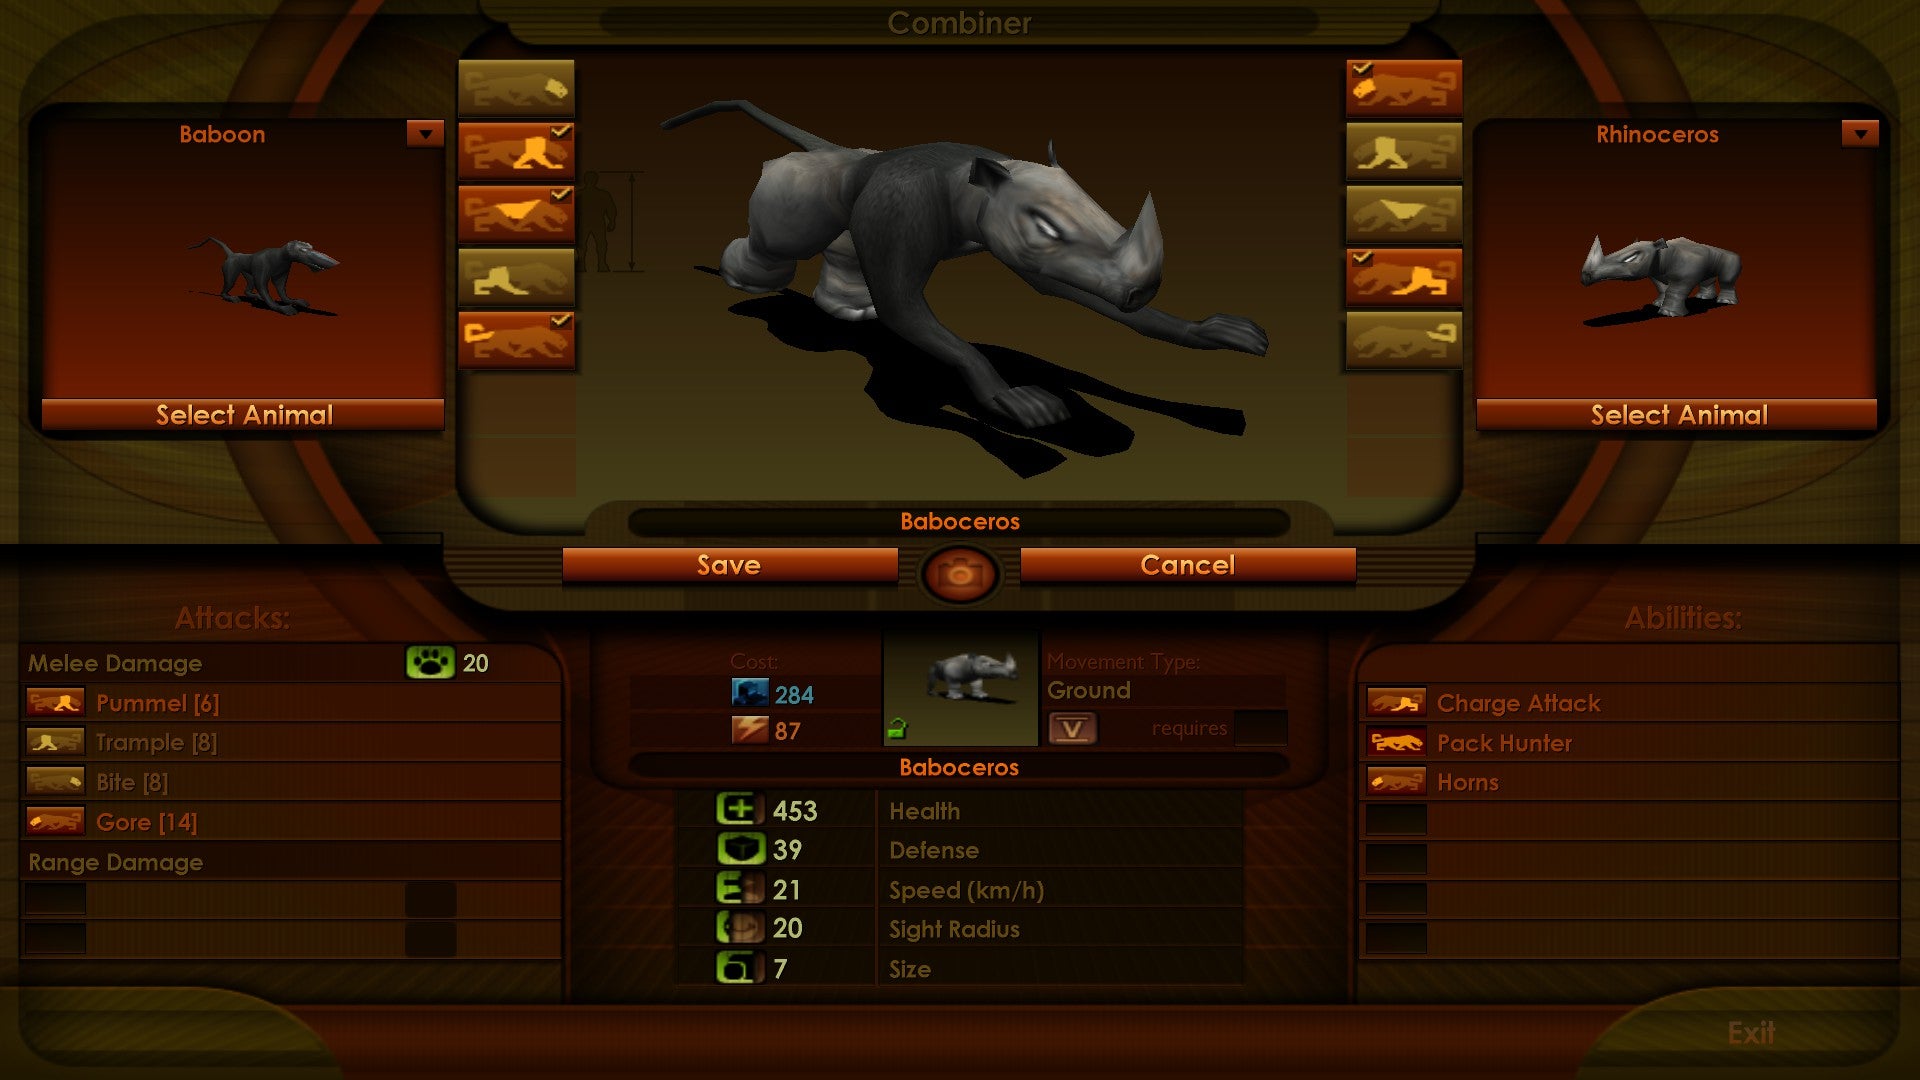 The creature creator screen in Impossible Creatures, showcasing a hybrid between a Baboon and a Rhino.